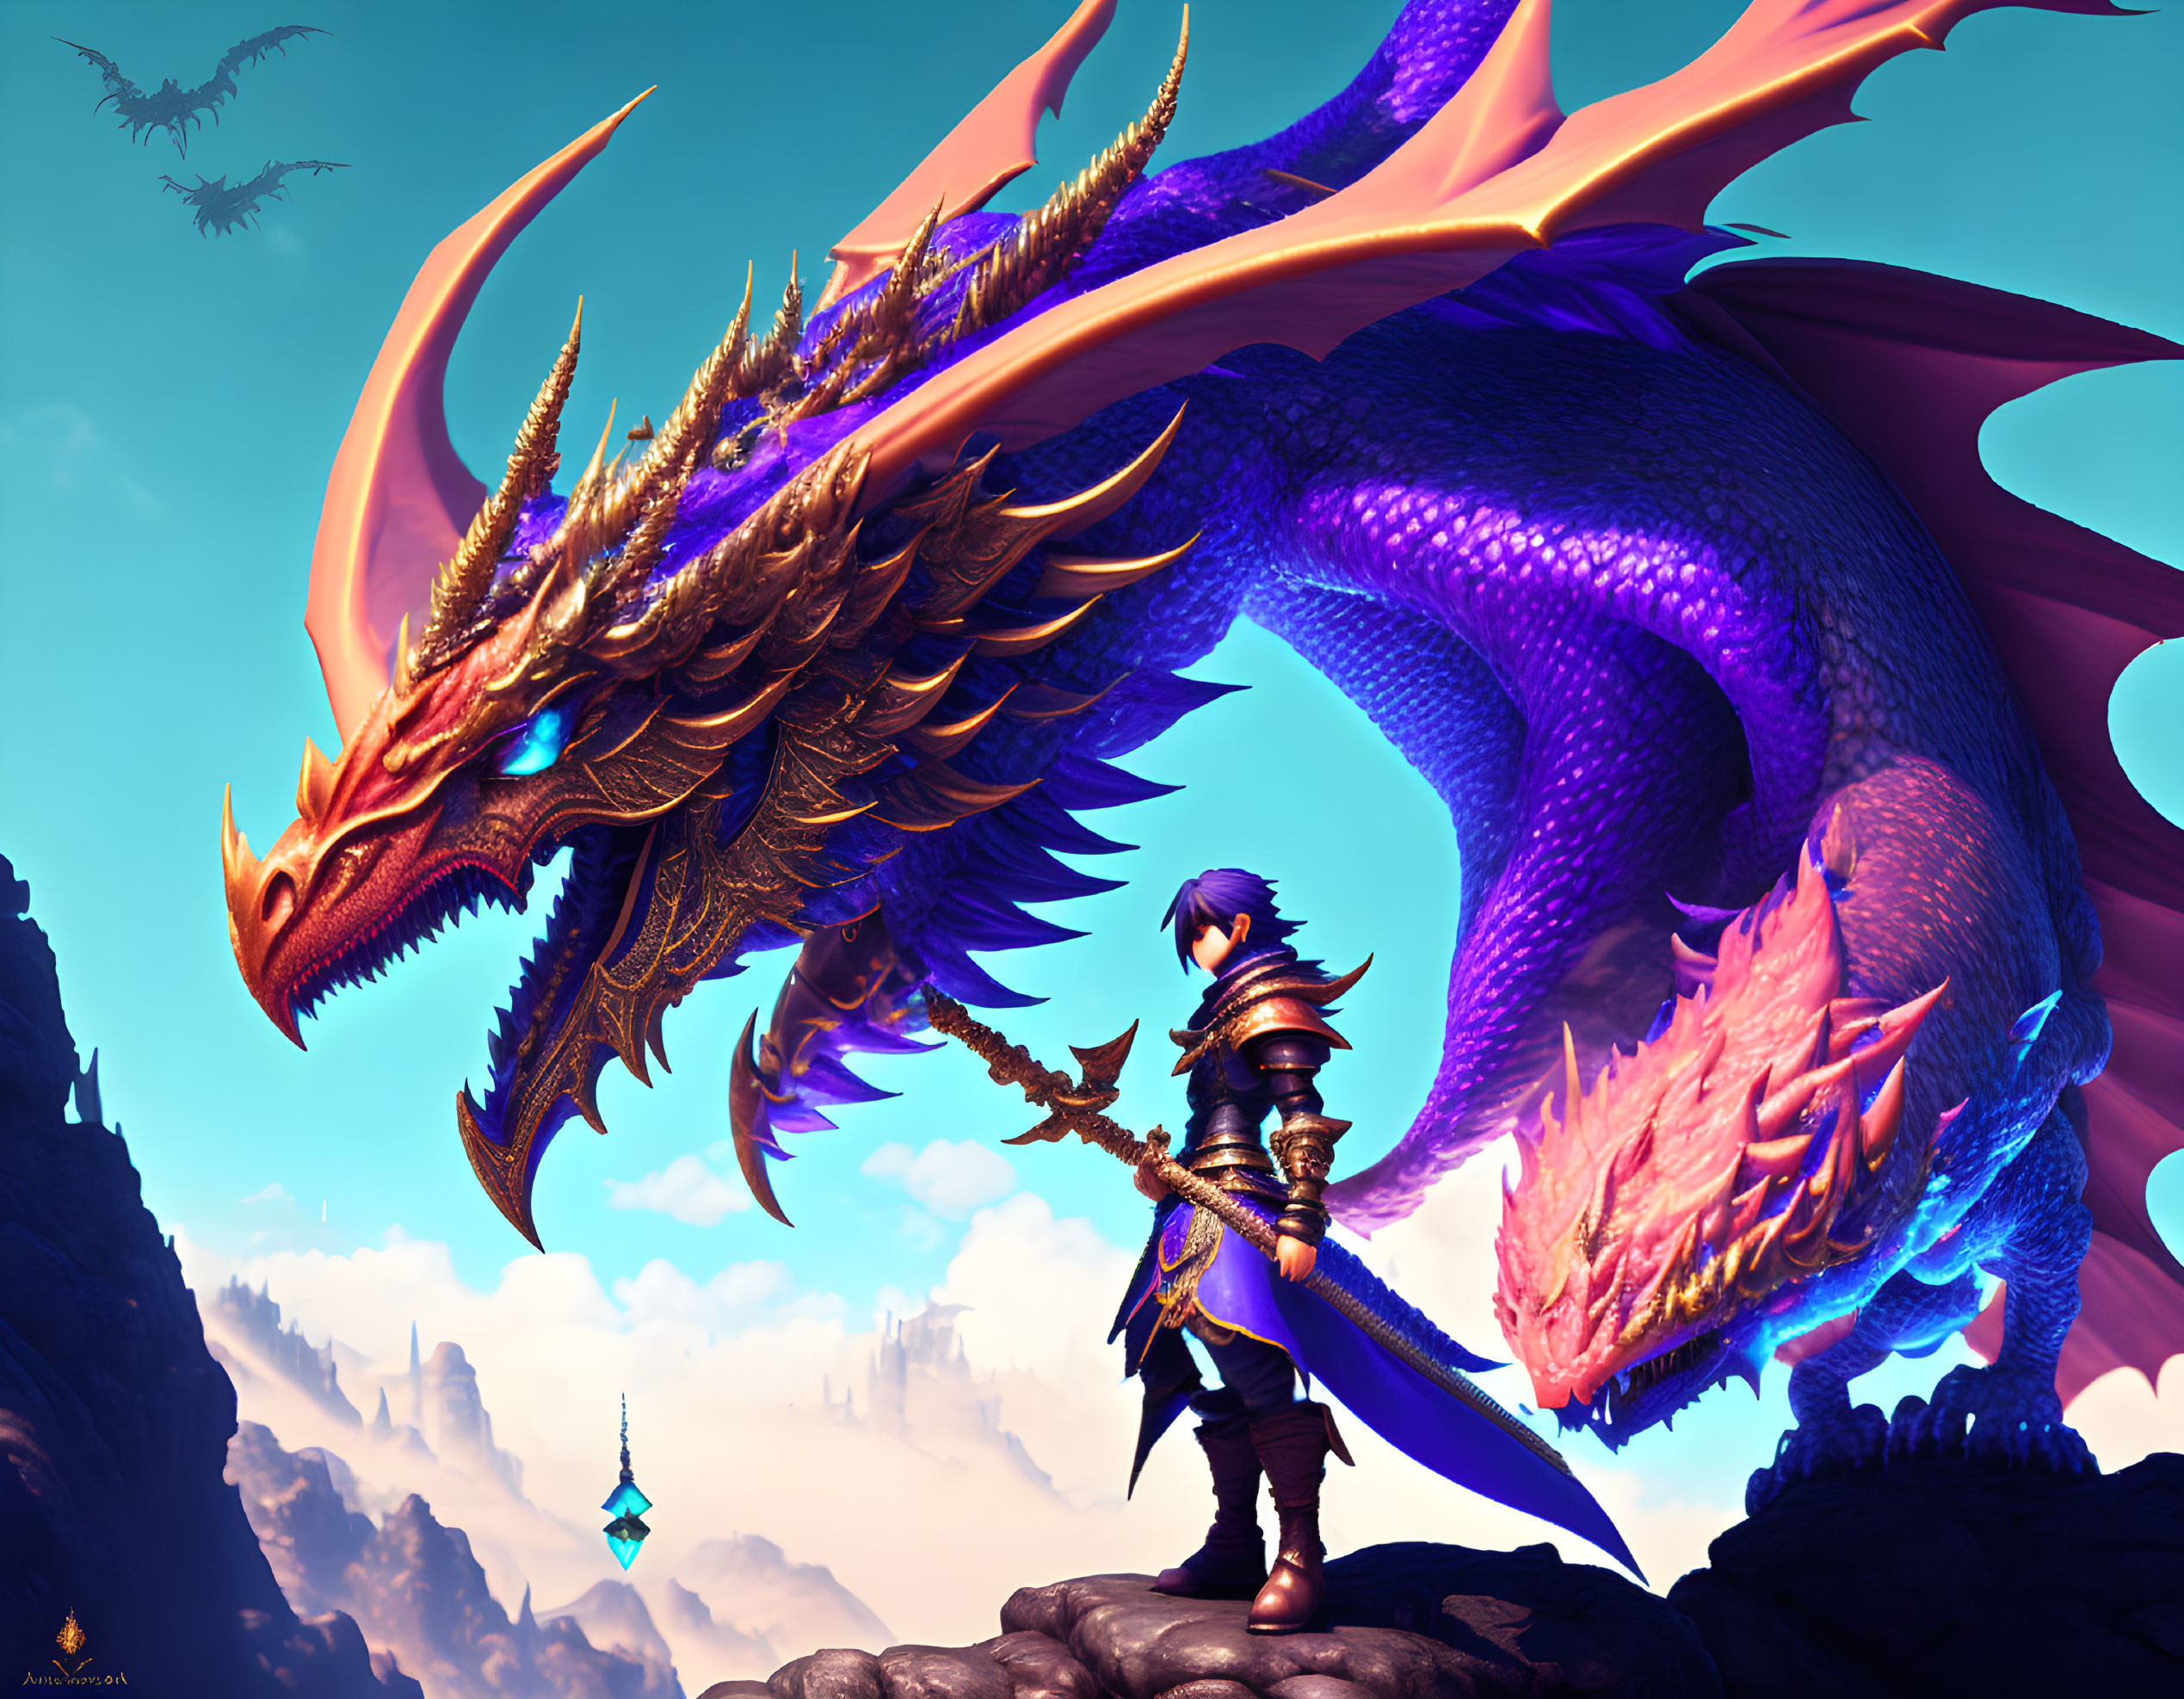 Colorful warrior and dragon illustration with mountain backdrop